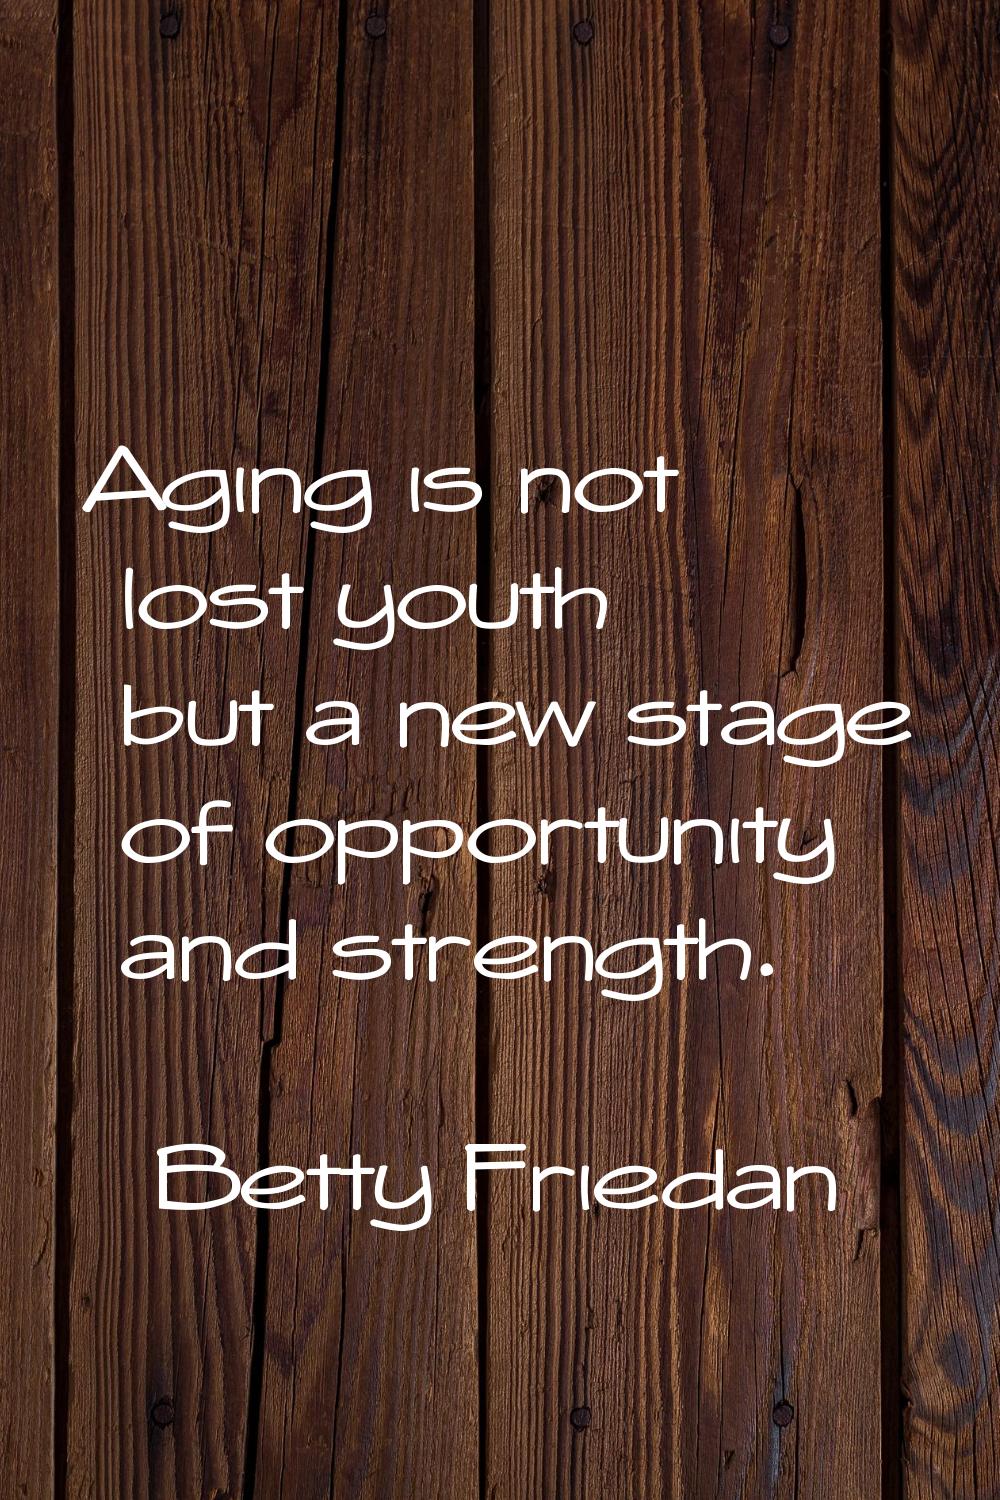 Aging is not lost youth but a new stage of opportunity and strength.